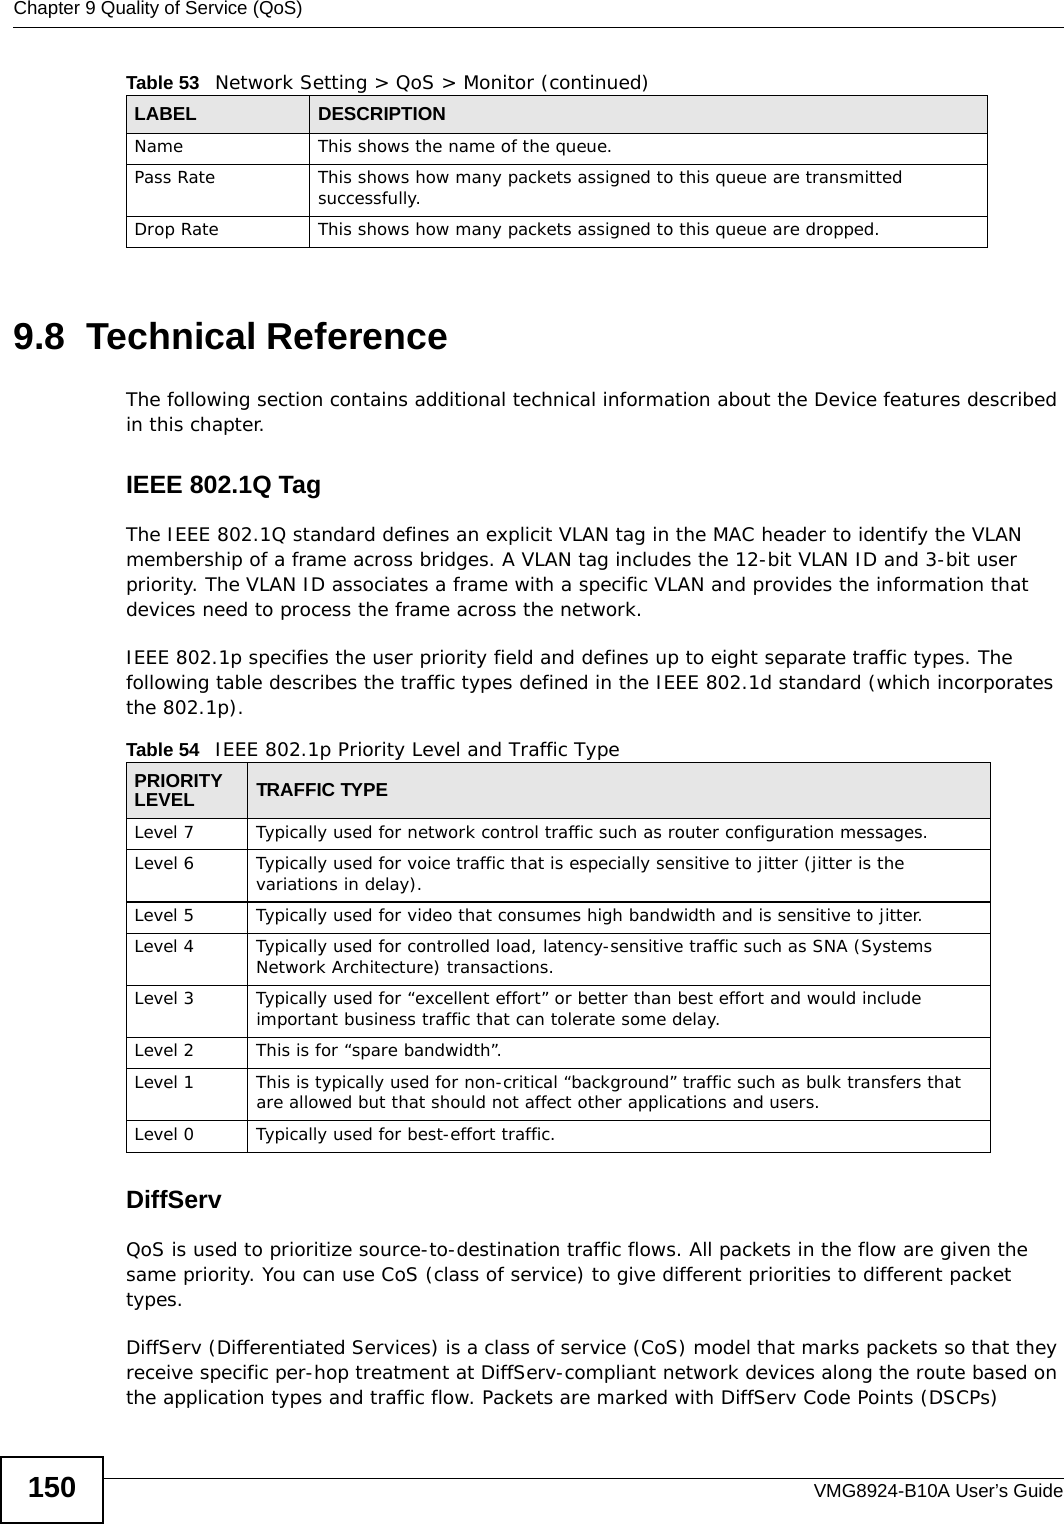 Chapter 9 Quality of Service (QoS)VMG8924-B10A User’s Guide1509.8  Technical ReferenceThe following section contains additional technical information about the Device features described in this chapter.IEEE 802.1Q TagThe IEEE 802.1Q standard defines an explicit VLAN tag in the MAC header to identify the VLAN membership of a frame across bridges. A VLAN tag includes the 12-bit VLAN ID and 3-bit user priority. The VLAN ID associates a frame with a specific VLAN and provides the information that devices need to process the frame across the network. IEEE 802.1p specifies the user priority field and defines up to eight separate traffic types. The following table describes the traffic types defined in the IEEE 802.1d standard (which incorporates the 802.1p).  DiffServ QoS is used to prioritize source-to-destination traffic flows. All packets in the flow are given the same priority. You can use CoS (class of service) to give different priorities to different packet types.DiffServ (Differentiated Services) is a class of service (CoS) model that marks packets so that they receive specific per-hop treatment at DiffServ-compliant network devices along the route based on the application types and traffic flow. Packets are marked with DiffServ Code Points (DSCPs) Name This shows the name of the queue. Pass Rate This shows how many packets assigned to this queue are transmitted successfully.Drop Rate This shows how many packets assigned to this queue are dropped.Table 53   Network Setting &gt; QoS &gt; Monitor (continued)LABEL DESCRIPTIONTable 54   IEEE 802.1p Priority Level and Traffic TypePRIORITY LEVEL TRAFFIC TYPELevel 7 Typically used for network control traffic such as router configuration messages.Level 6 Typically used for voice traffic that is especially sensitive to jitter (jitter is the variations in delay).Level 5 Typically used for video that consumes high bandwidth and is sensitive to jitter.Level 4 Typically used for controlled load, latency-sensitive traffic such as SNA (Systems Network Architecture) transactions.Level 3 Typically used for “excellent effort” or better than best effort and would include important business traffic that can tolerate some delay.Level 2 This is for “spare bandwidth”. Level 1 This is typically used for non-critical “background” traffic such as bulk transfers that are allowed but that should not affect other applications and users. Level 0 Typically used for best-effort traffic.